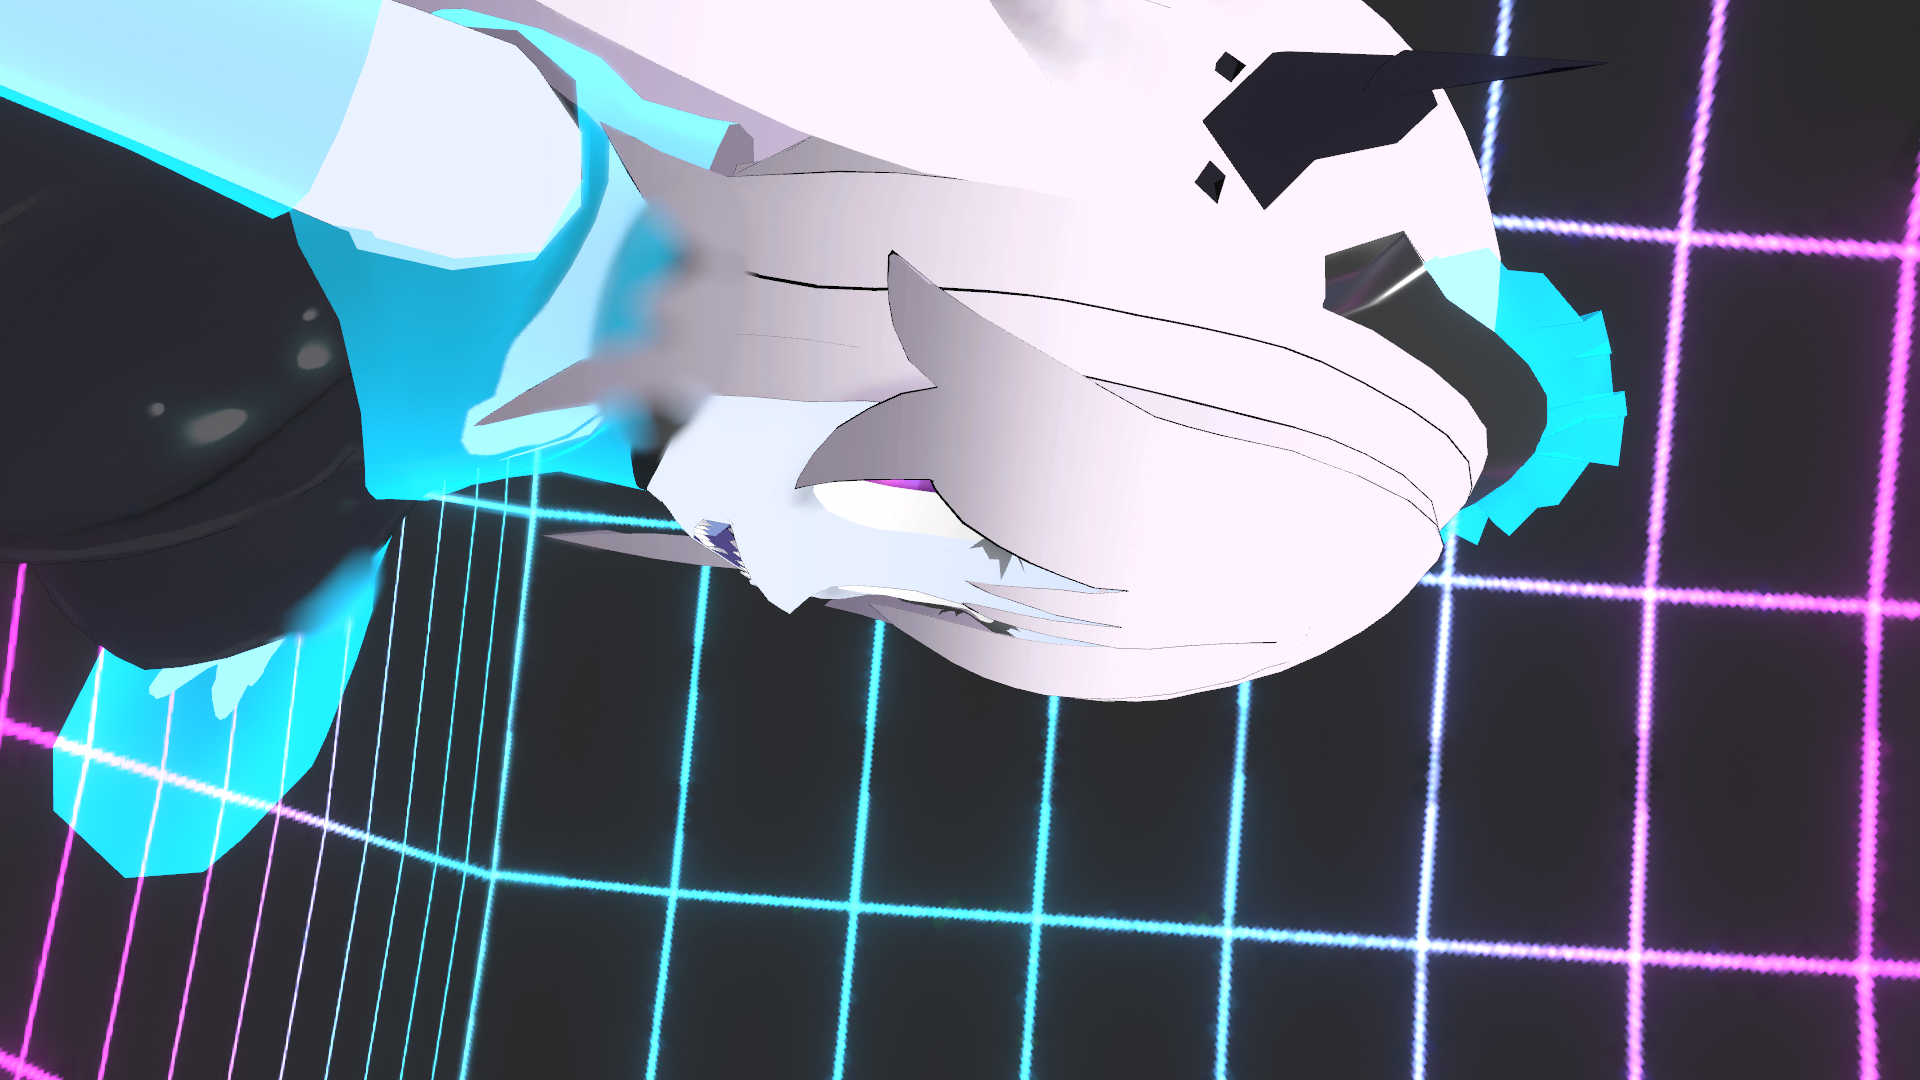 VRChat_1920x1080_2021-12-05_05-52-42.643.png